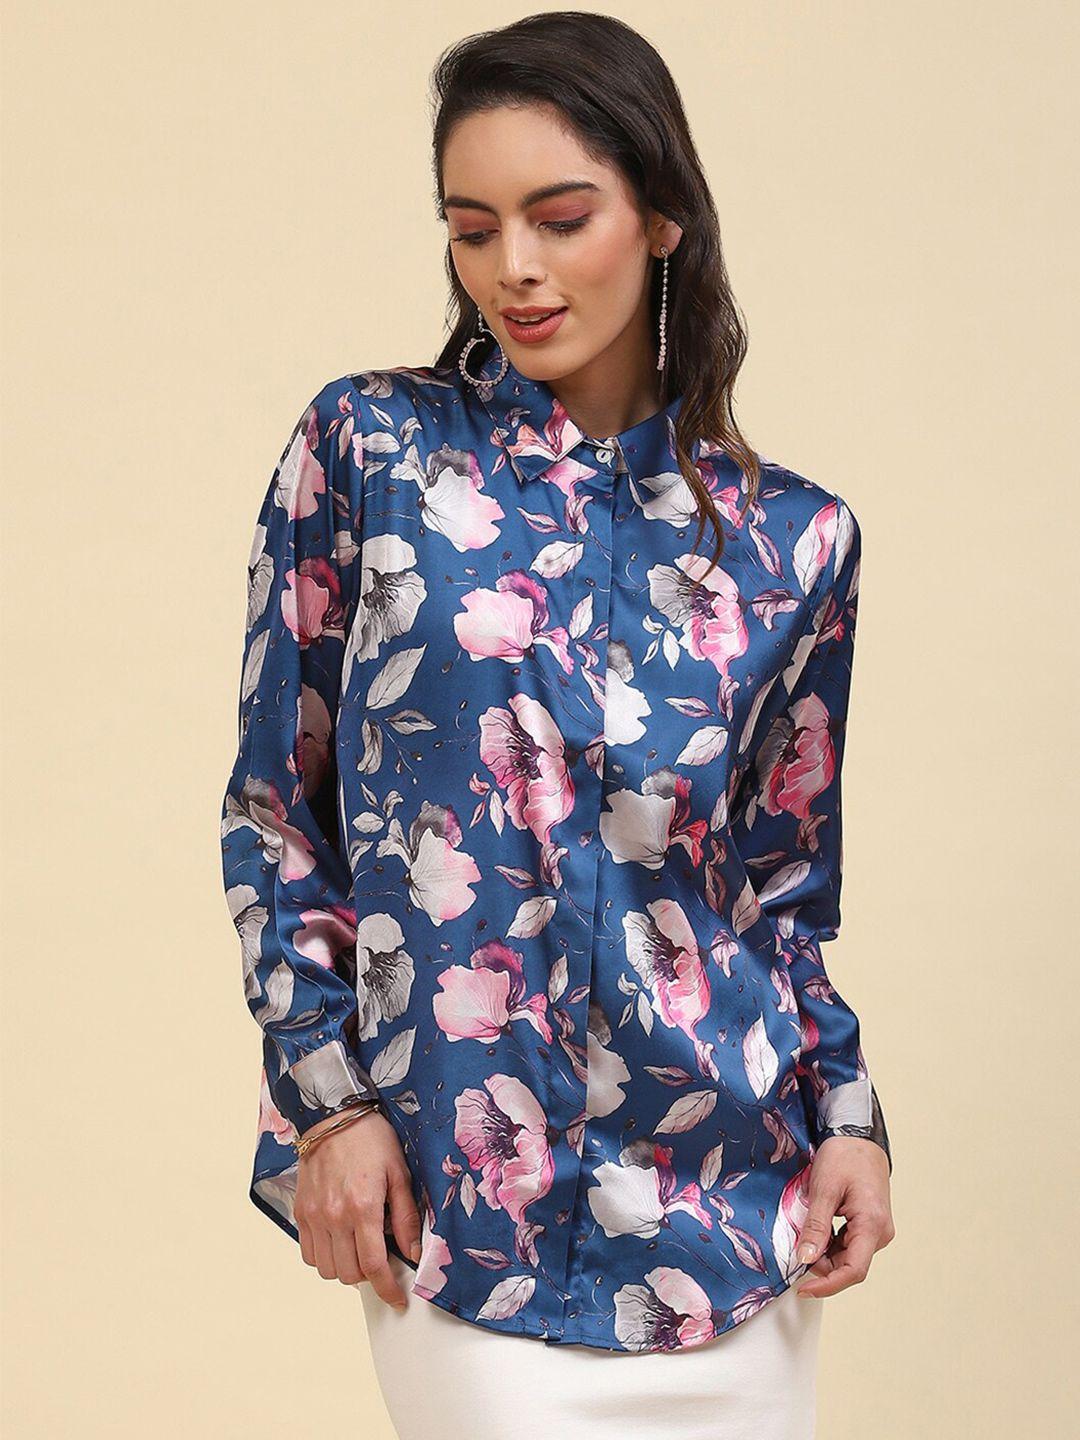 monte carlo floral printed long cuff sleeves shirt style top